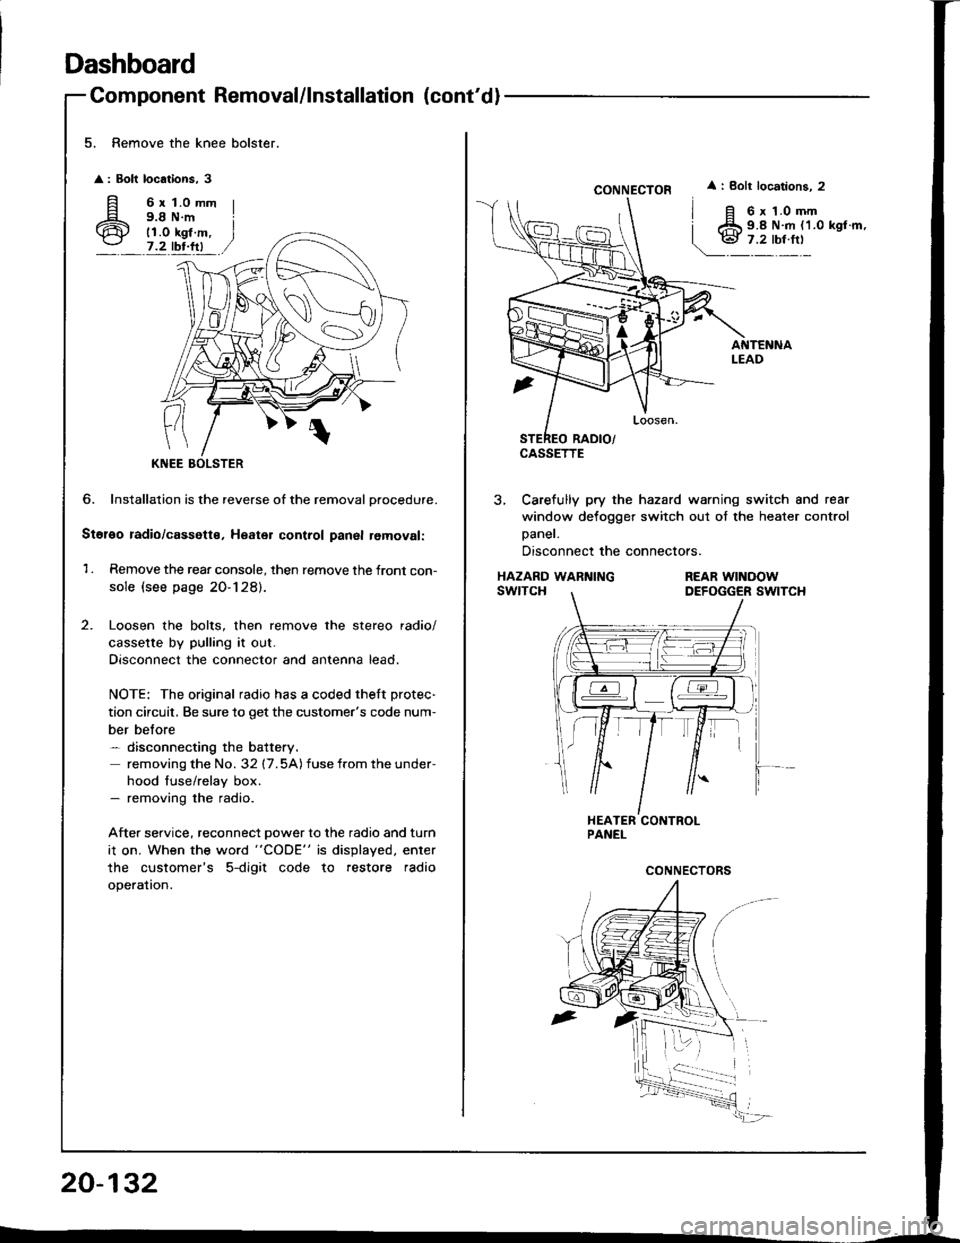 HONDA INTEGRA 1994 4.G Owners Manual Dashboard
Component Removal/lnstallation (contdl
5. Remove the knee bolster.
 
 
: Bolt locations, 3
fi 6rt.omm
6 i;ii#.,7.2 tbr.ftl
?
KNEE
6. Installation is the reverse of the removal Drocedure.
S